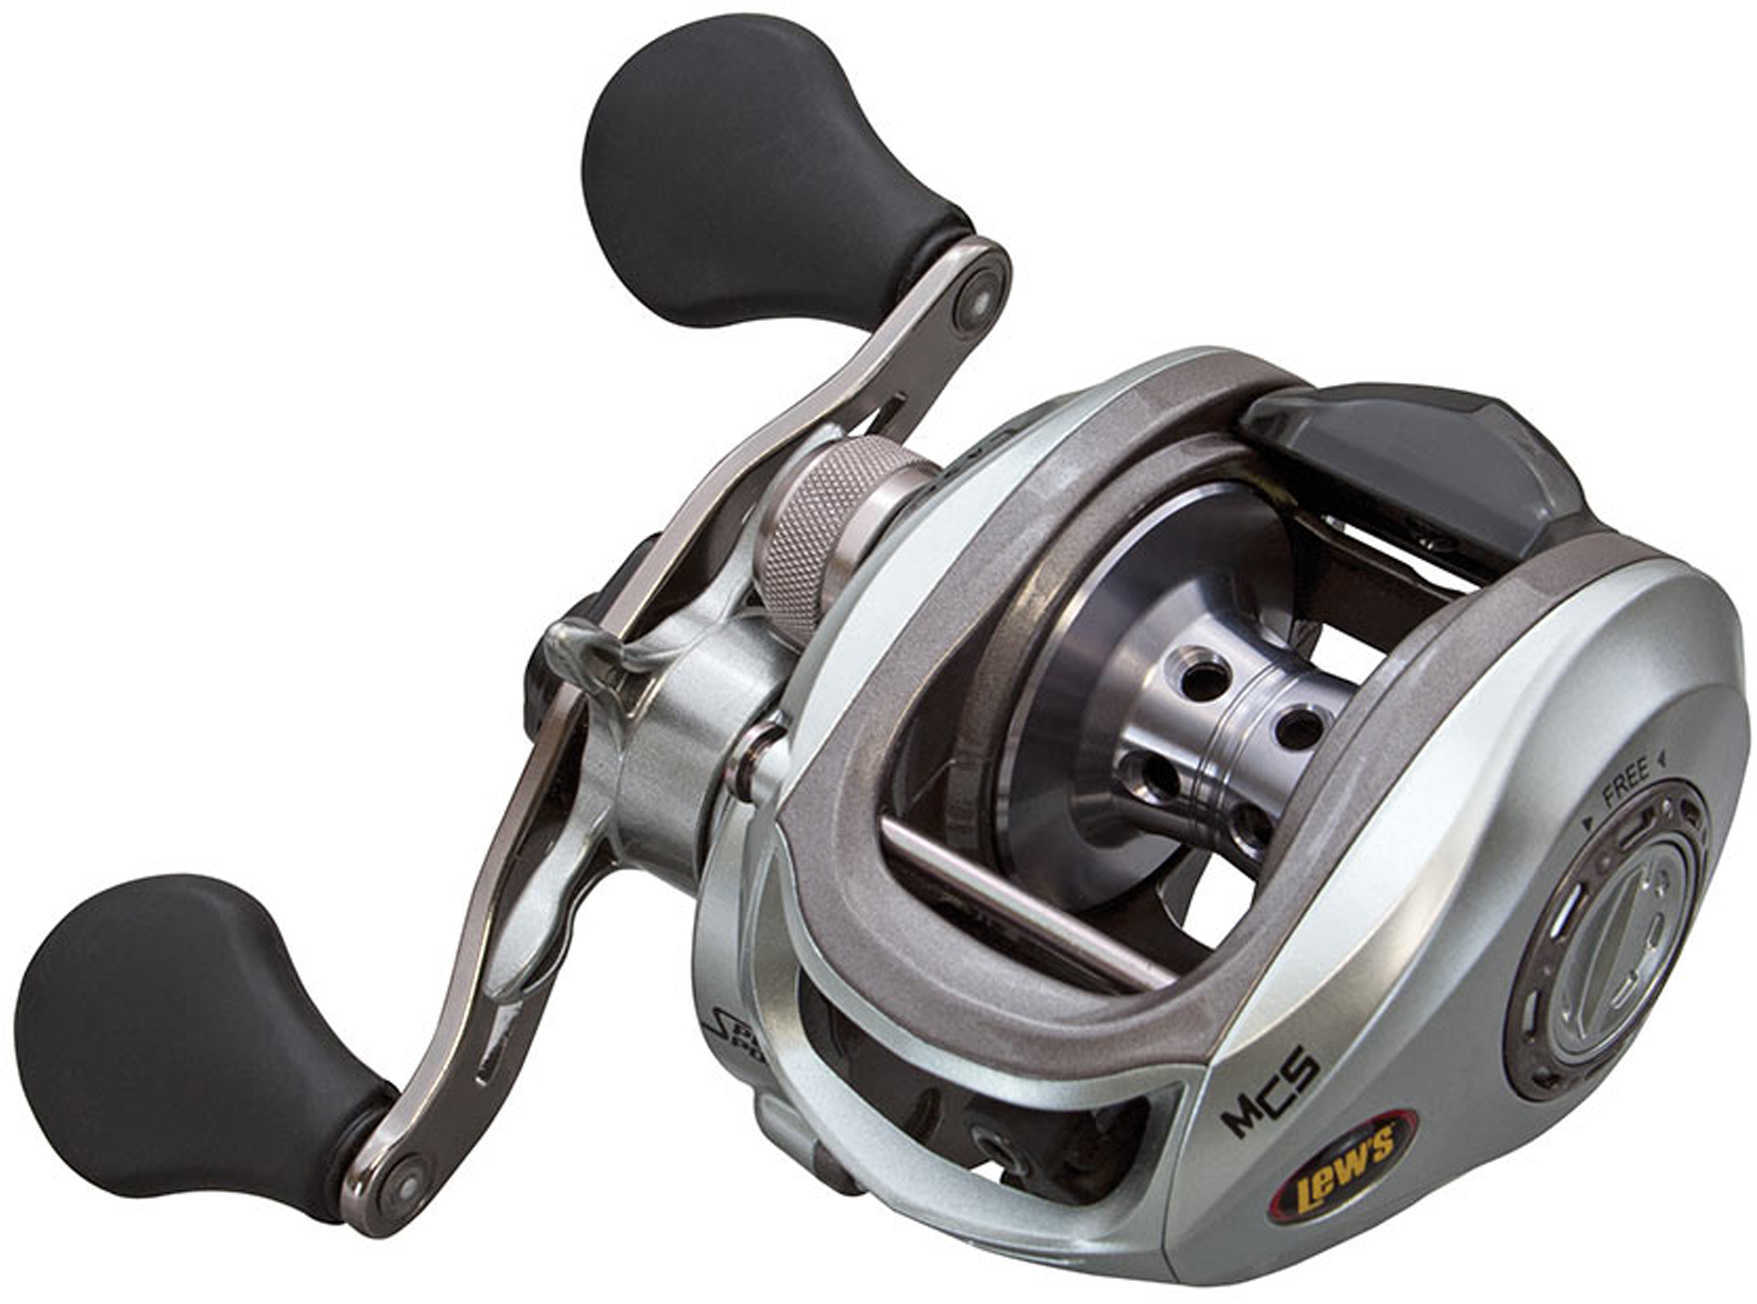 Lews Laser Mg Speed Spool Series Reel LSG1SHMG Right Hand Md: